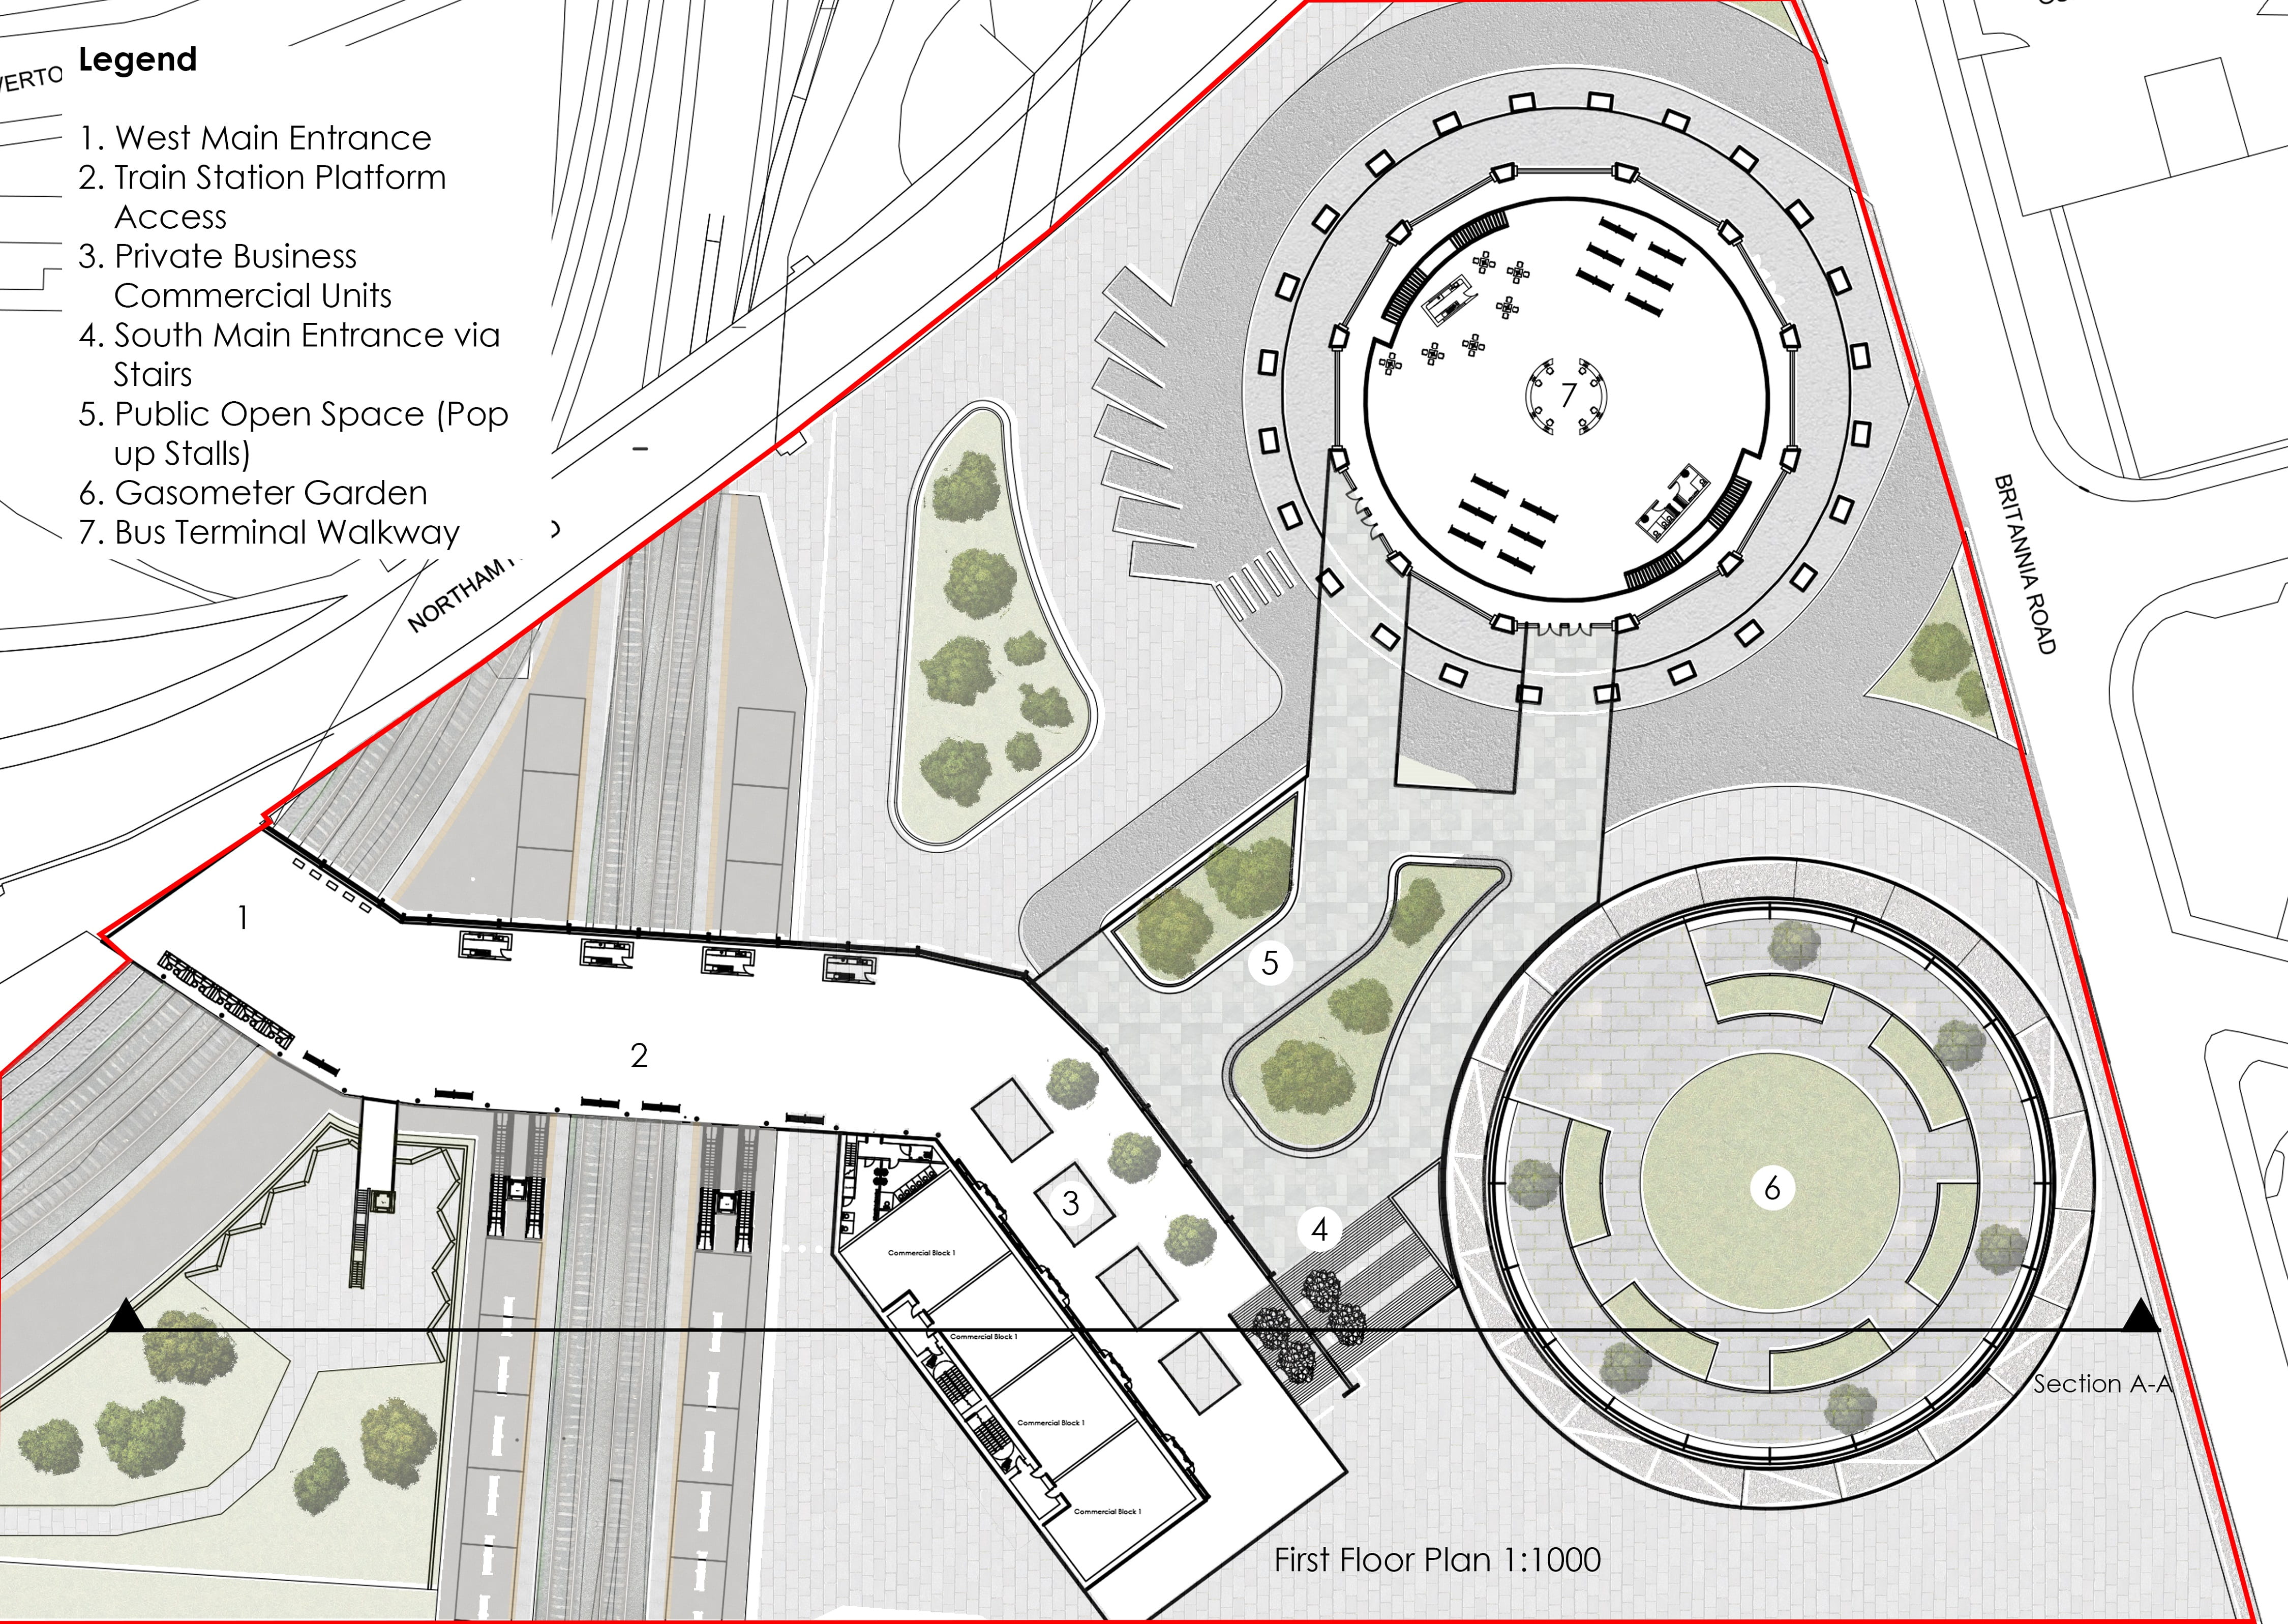 First Floor Plan showing both the Train Terminal and Bus Terminal layout along with landscaping.